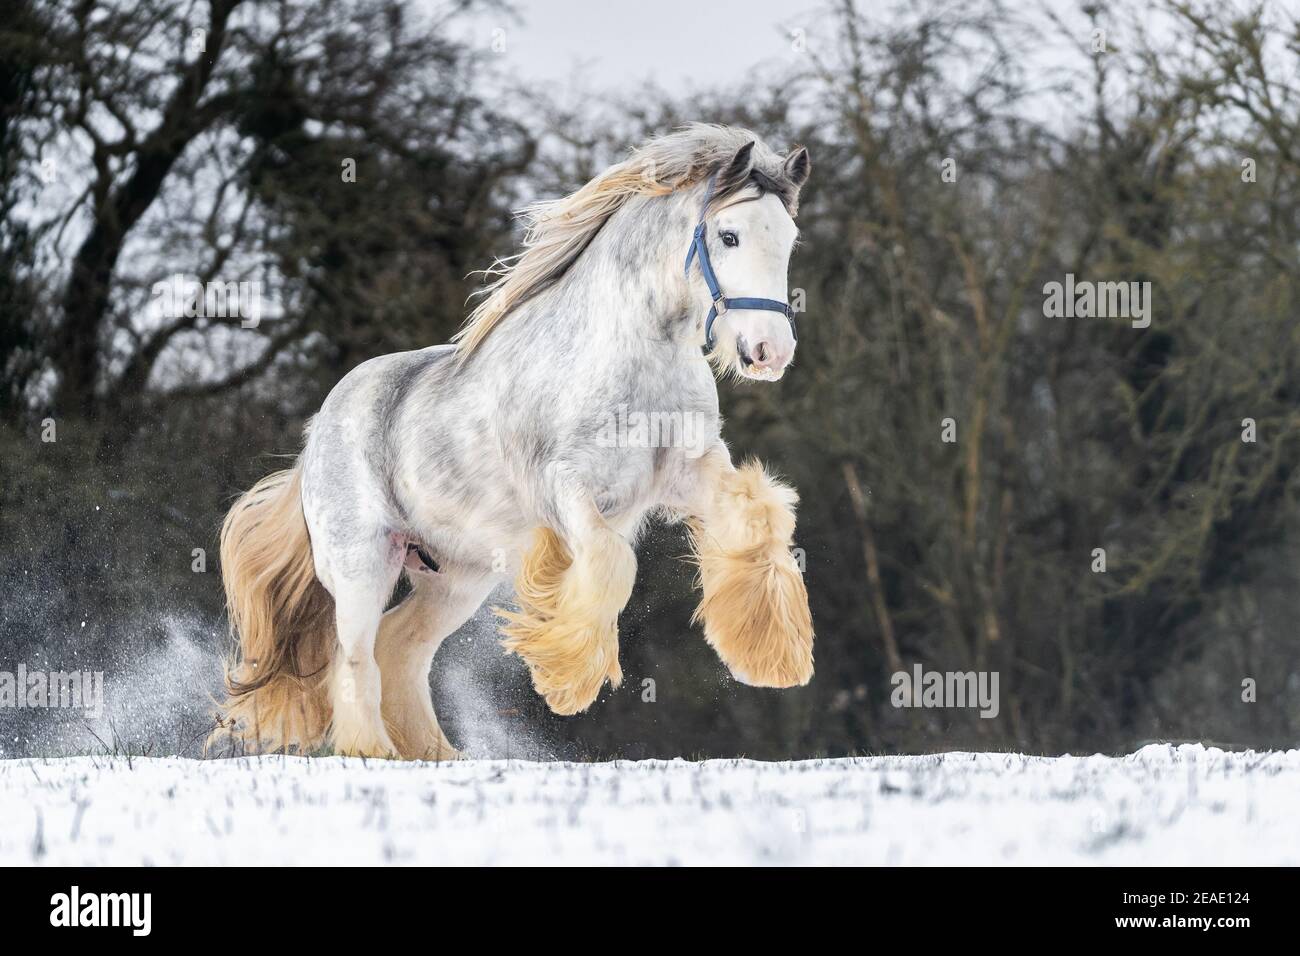 Beautiful big Irish Gypsy cob horse foal running wild in snow on ground rearing large feathered front legs up high  towards camera through feathers Stock Photo